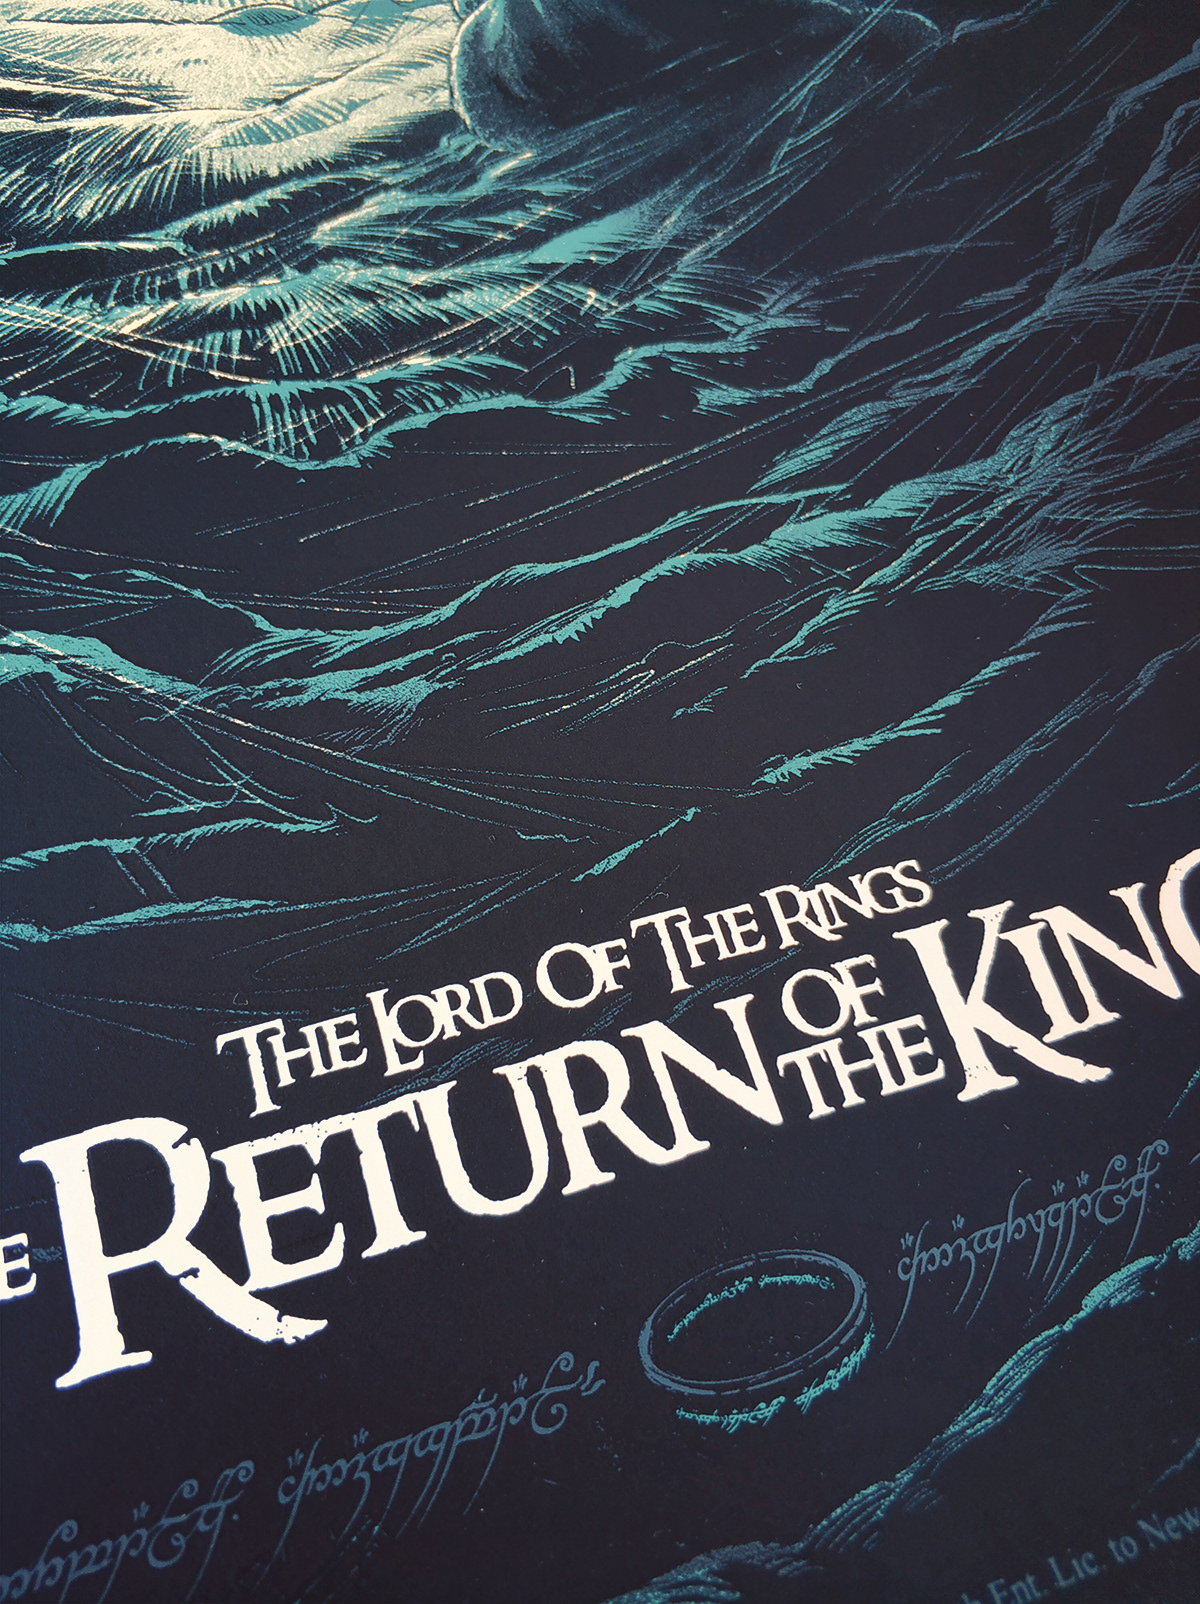 The lord of the rings return of the king Peter Jackson poster alternative movie poster mondo poster bottleneck gallery shellob